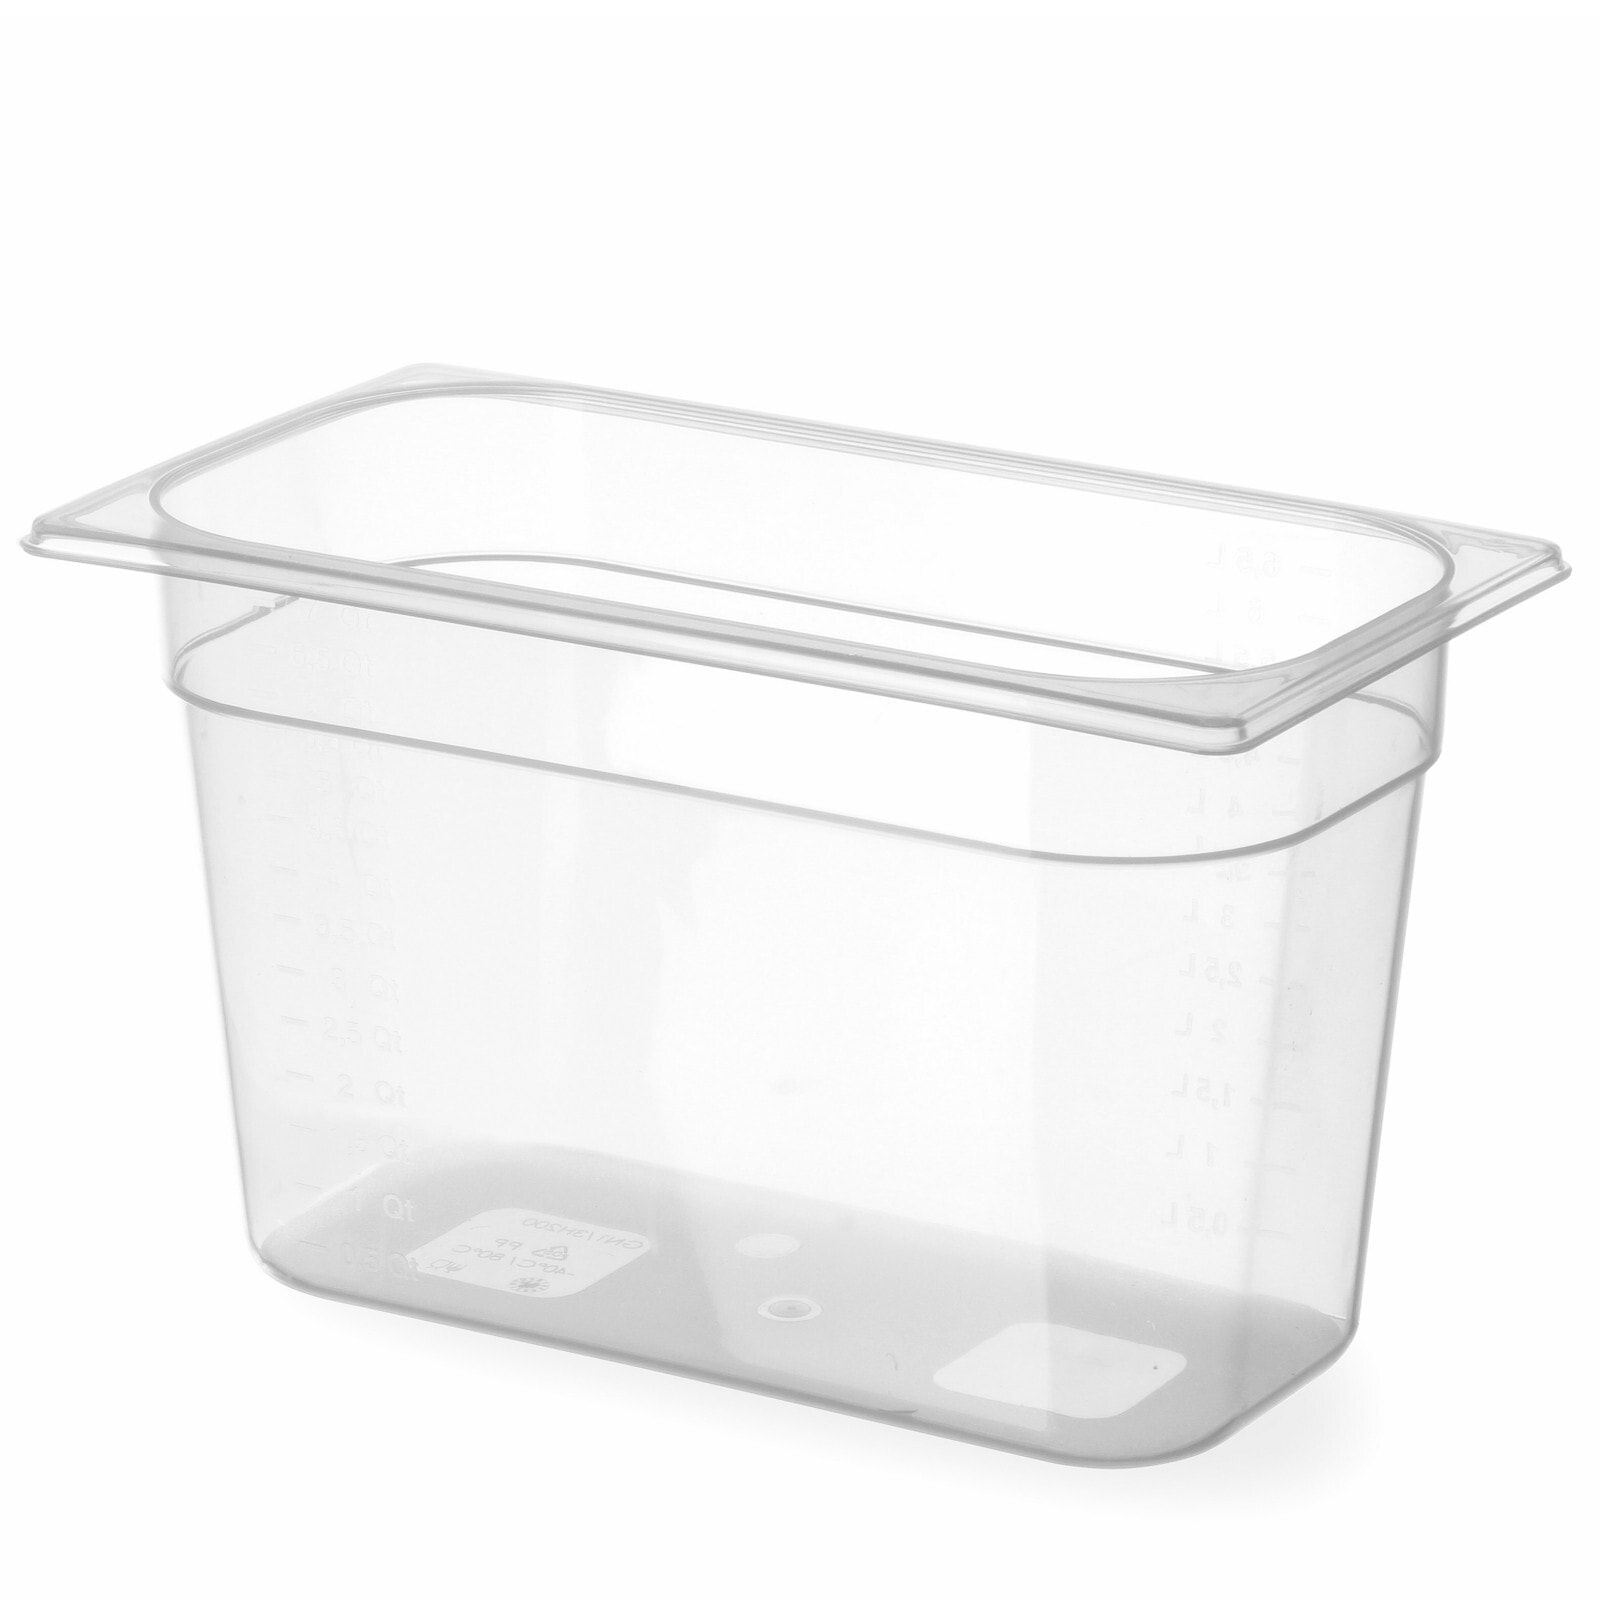 Gastronomy container made of polypropylene GN 1/3 height 200 mm - Hendi 880203